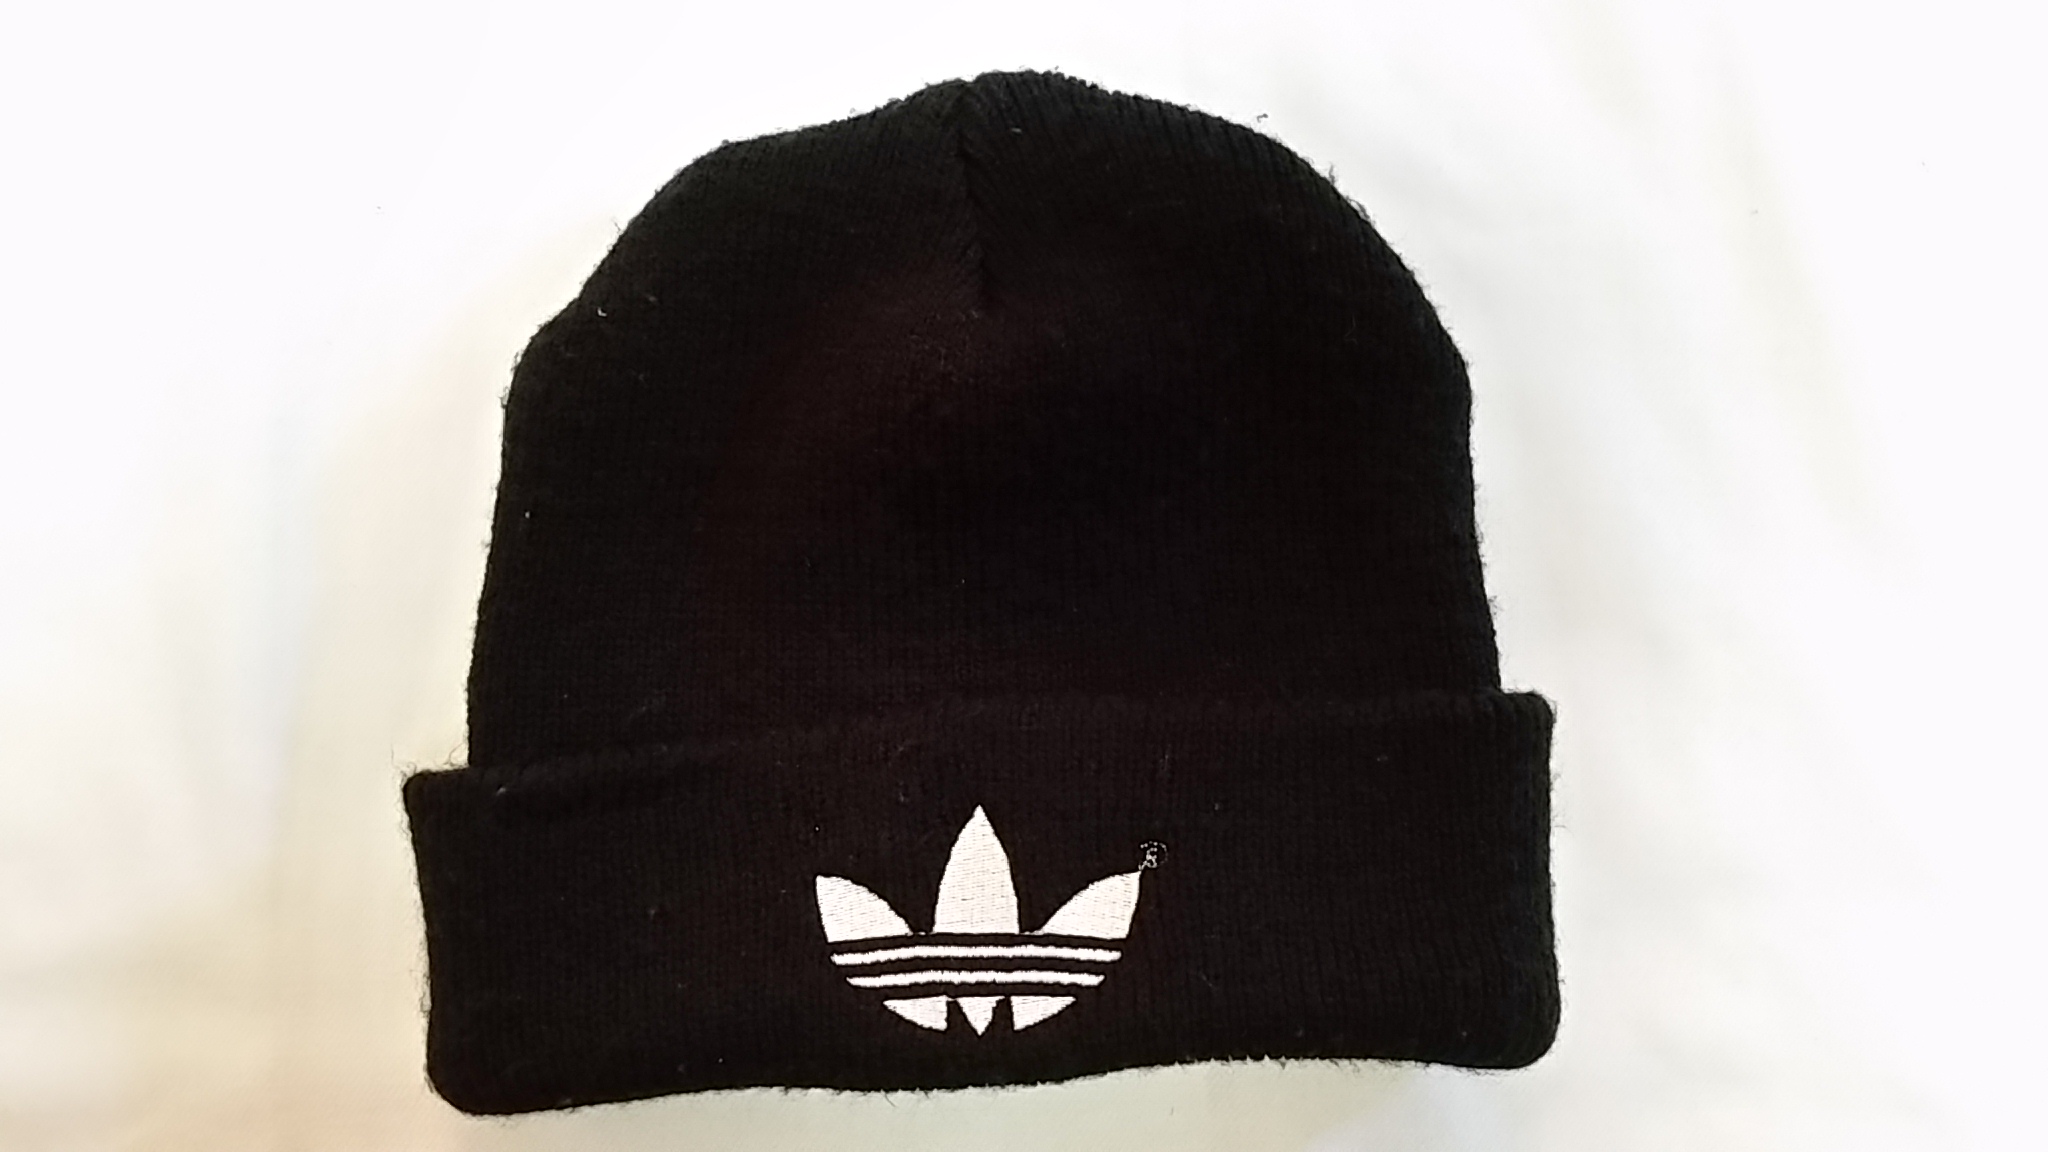 Vintage Adidas embroidered logo black beanie [One Size Fits All]